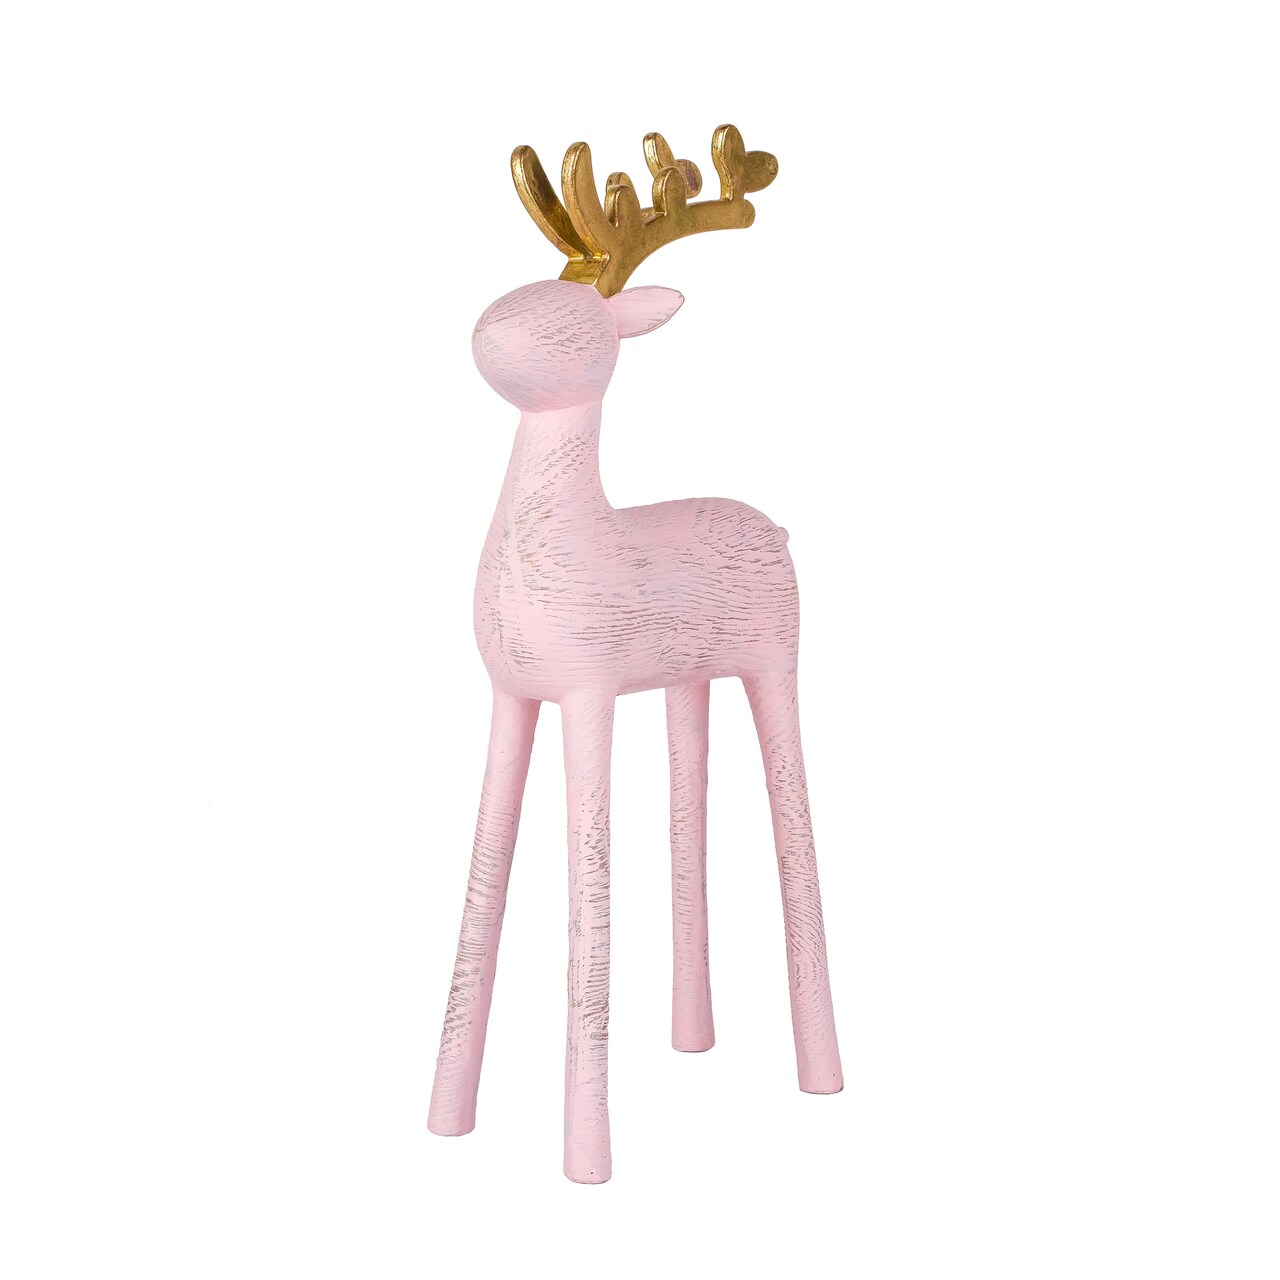 National Tree Company First Traditions Woodgrain Reindeer Christmas Decor with Woodgrain Finish, Pink, 12 in